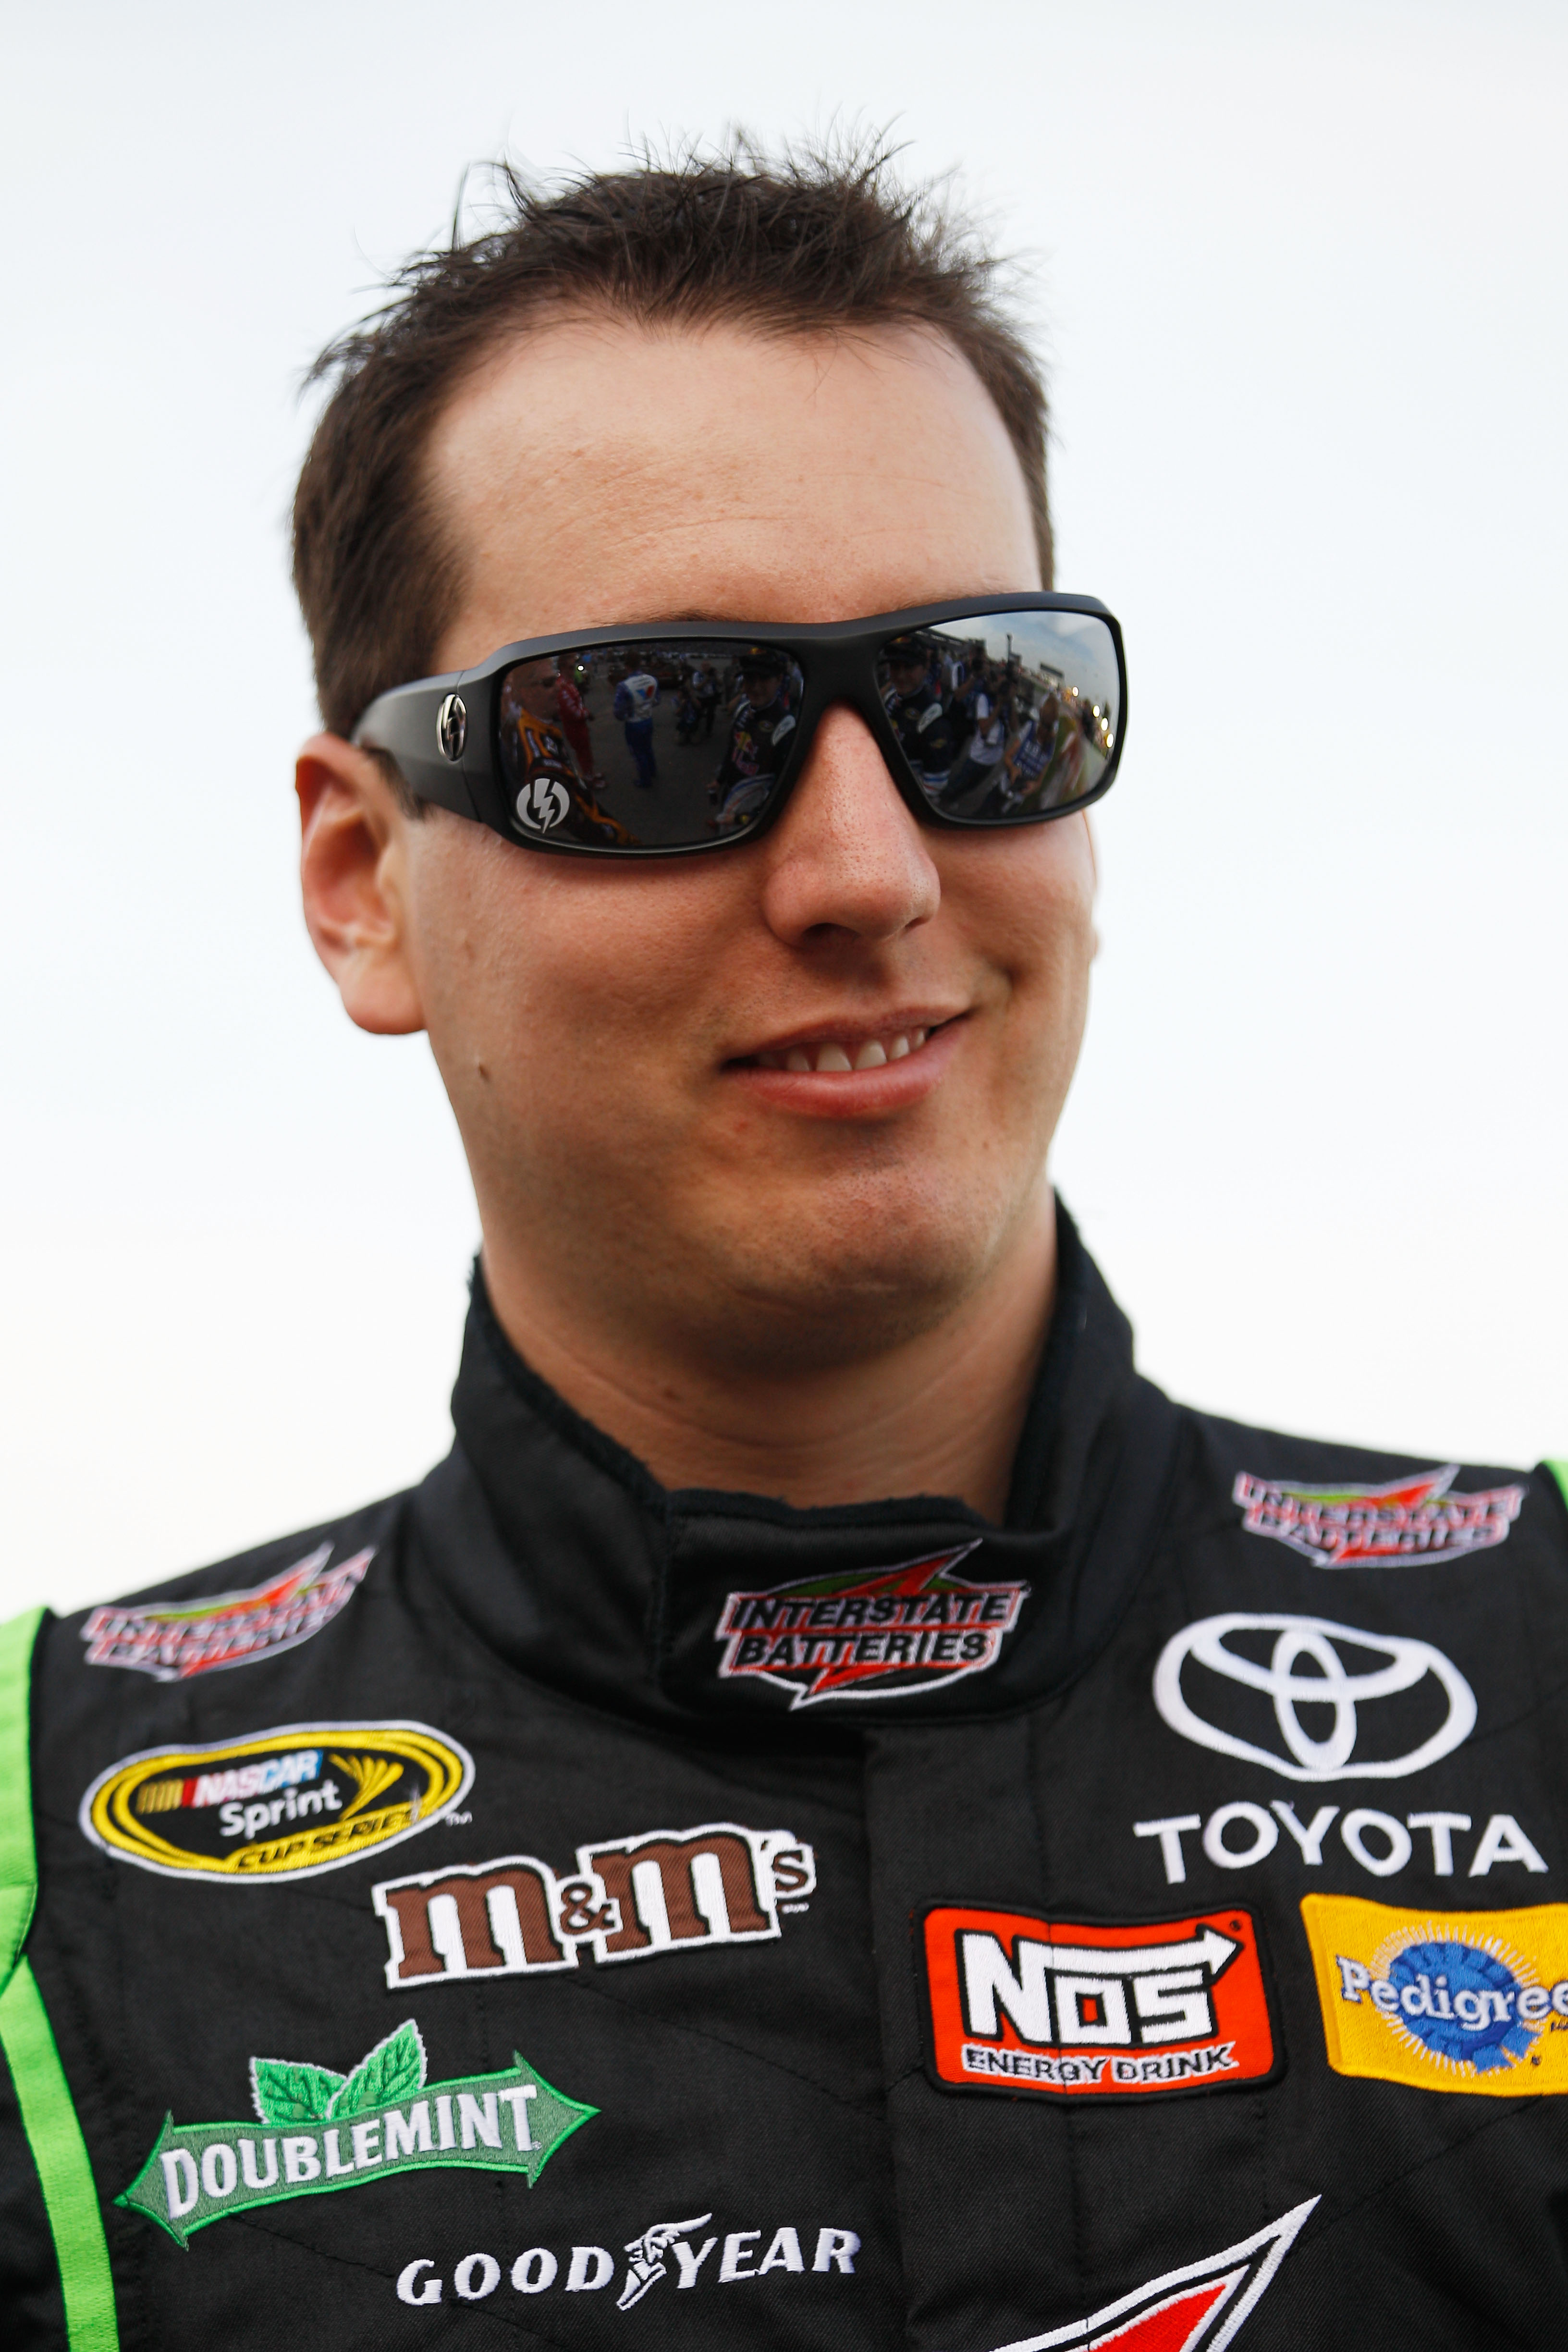 FORT WORTH, TX - APRIL 09:  Kyle Busch, driver of the #18 Interstate Batteries Toyota, stands on the grid prior to the start of the NASCAR Sprint Cup Series Samsung Mobile 500 at Texas Motor Speedway on April 9, 2011 in Fort Worth, Texas.  (Photo by Chris